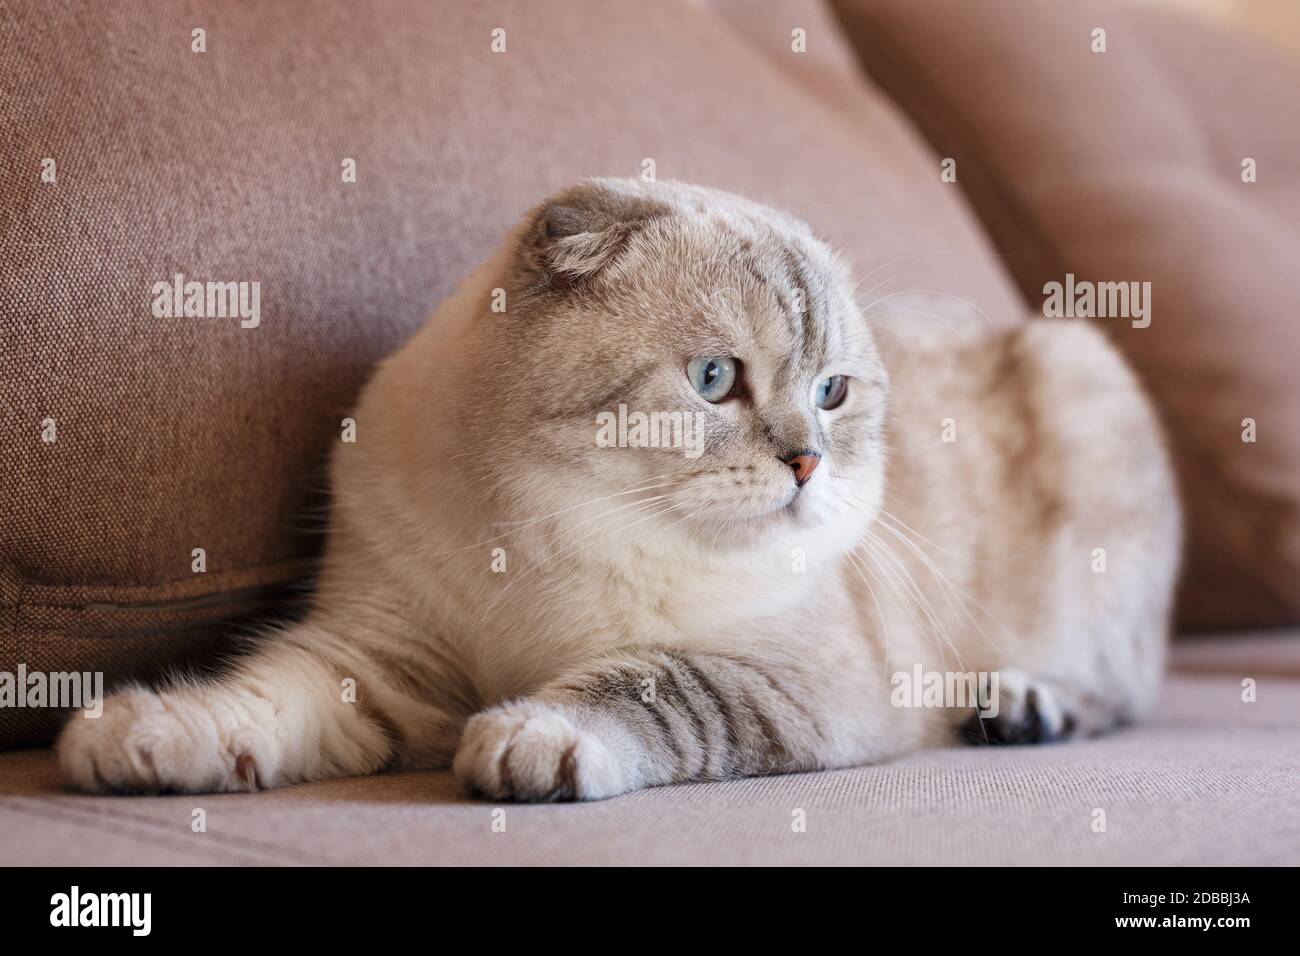 Very beautiful purebred gray cat. Photo causes a smile and positive emotions. Suitable for advertising a pet store or cat food. Scottish breed. Stock Photo